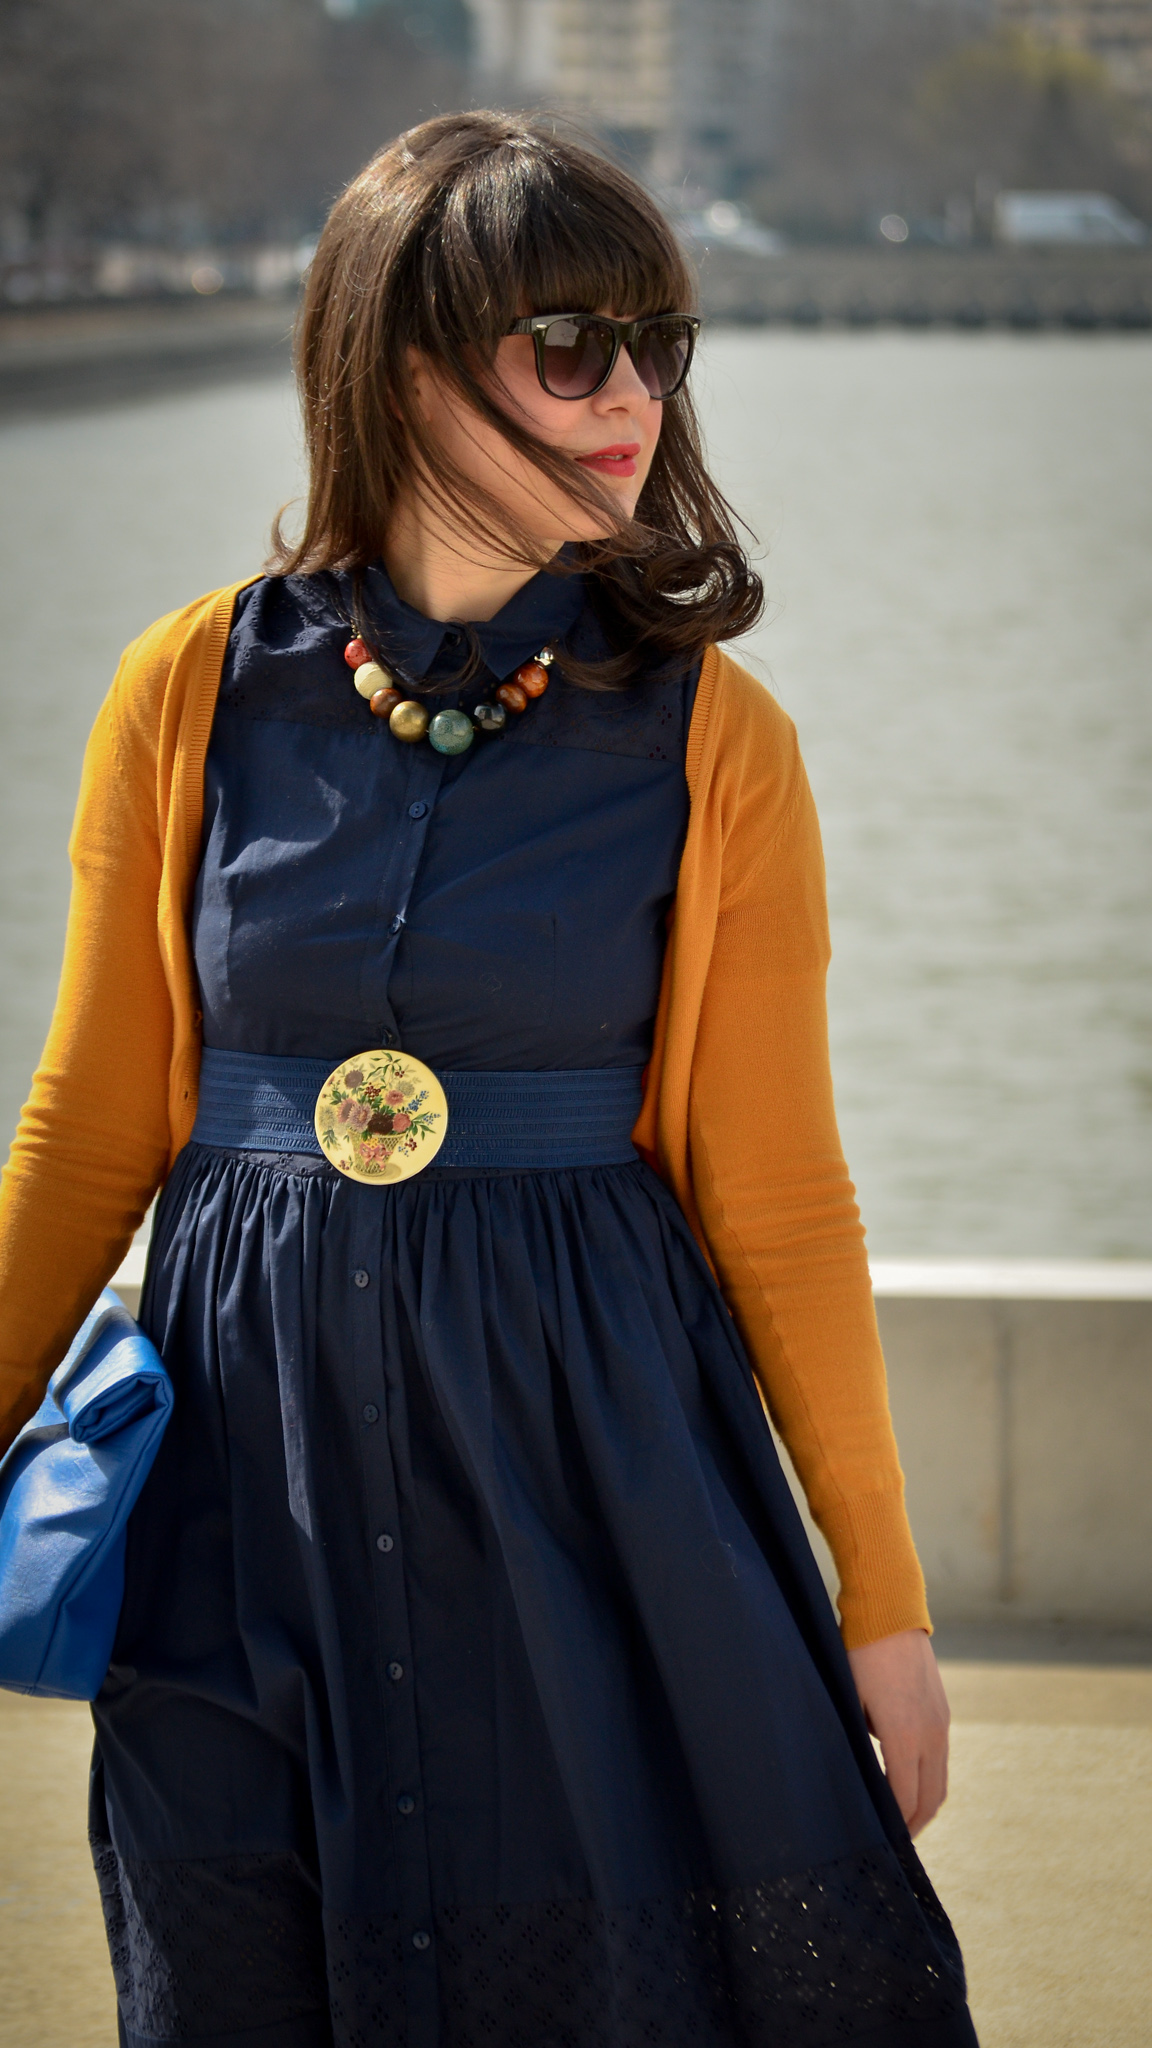 spring outfit navy dress 50s style mustard cardigan c&a thrifted belt cobalt blue clutch new yorker poema mustard heels 